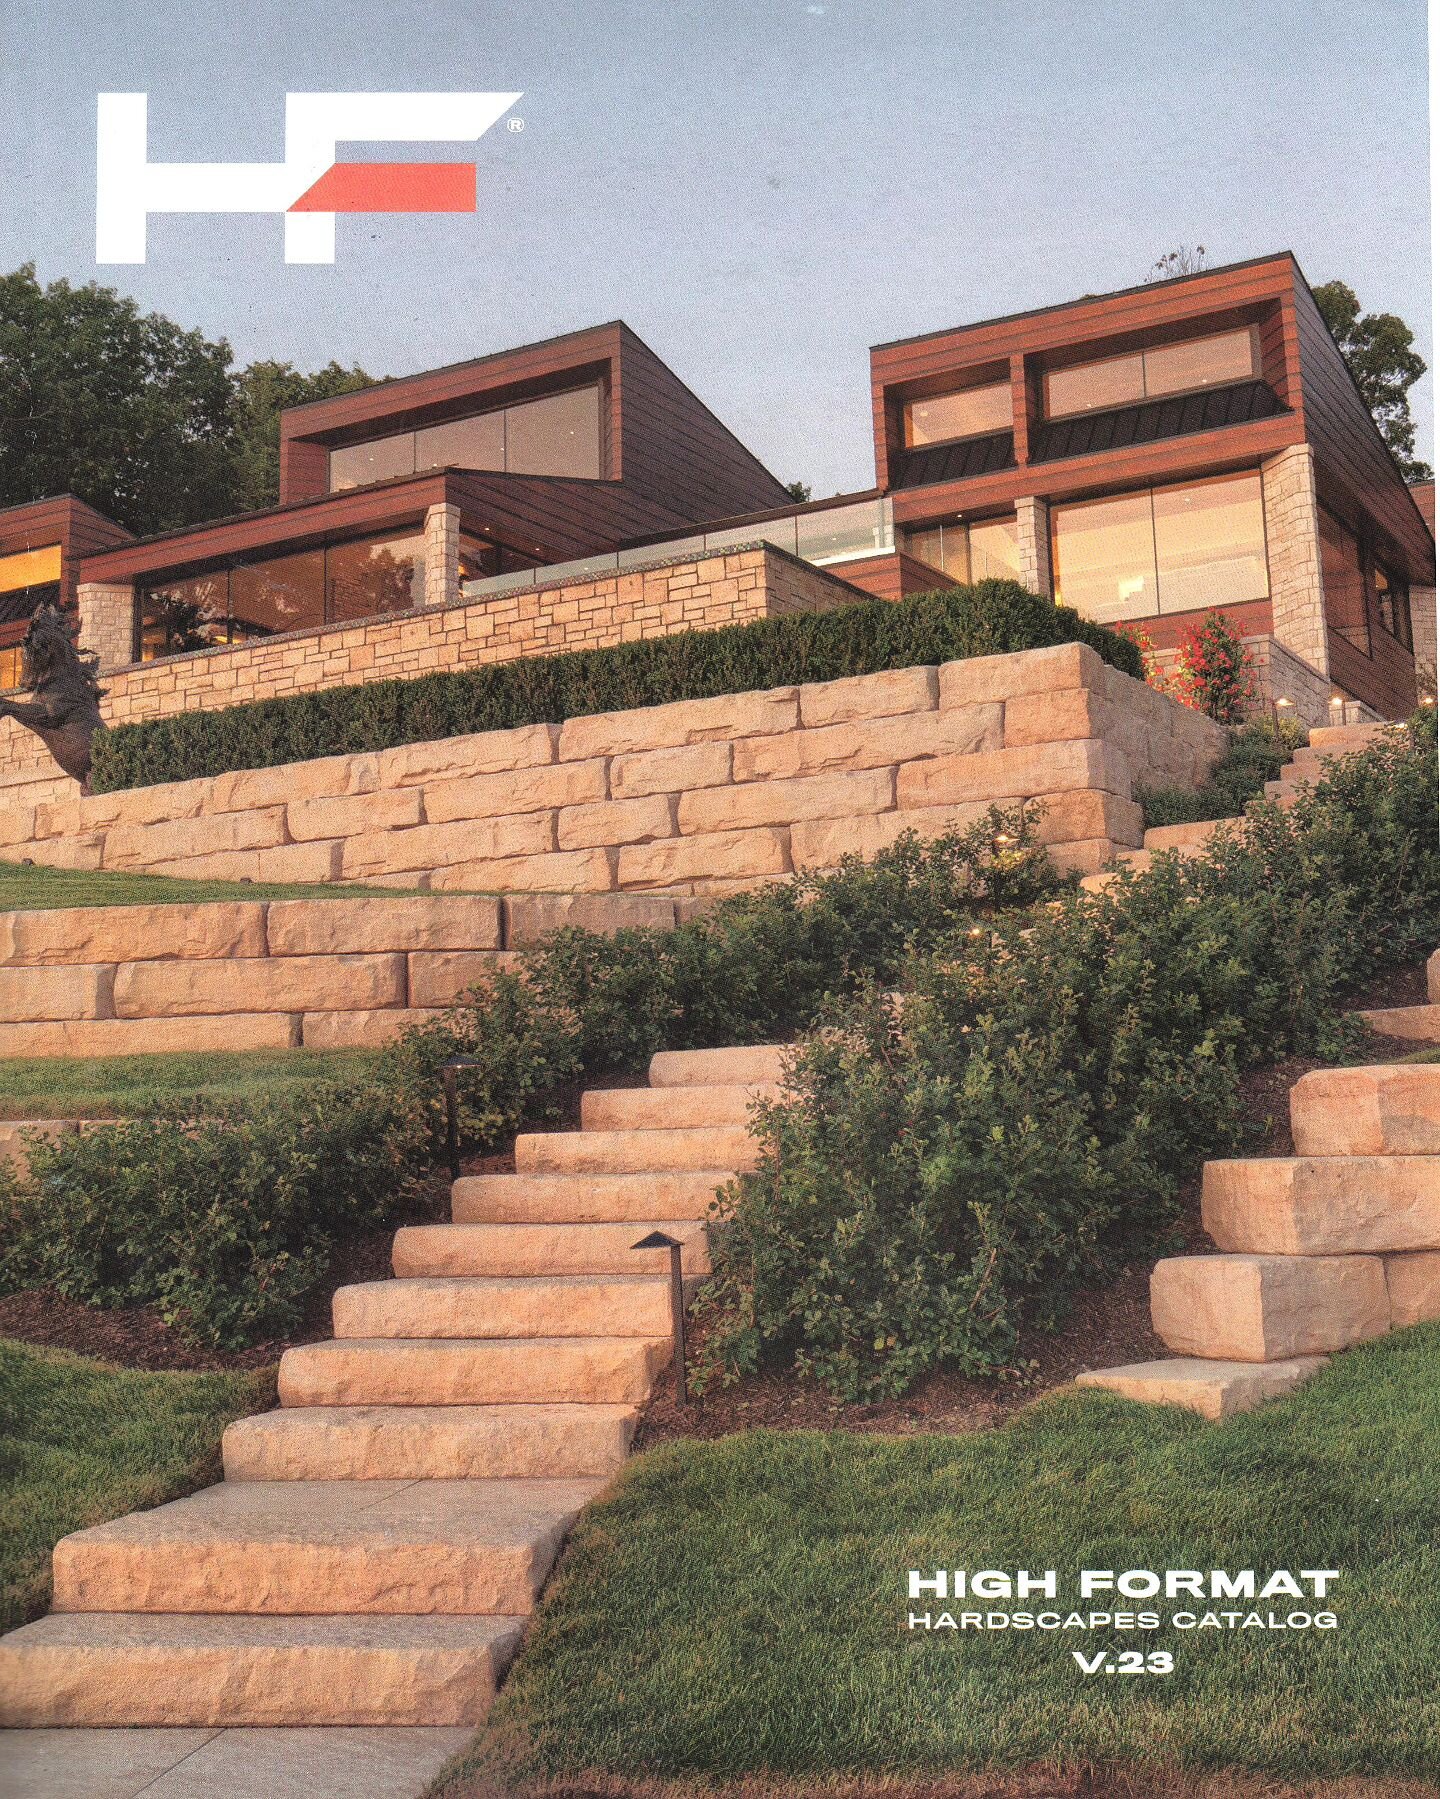 Thanks to @high.format for featuring our project on the 2023 catalog. Great products and great people
#highformat #rockretainingwall #landscapedesign